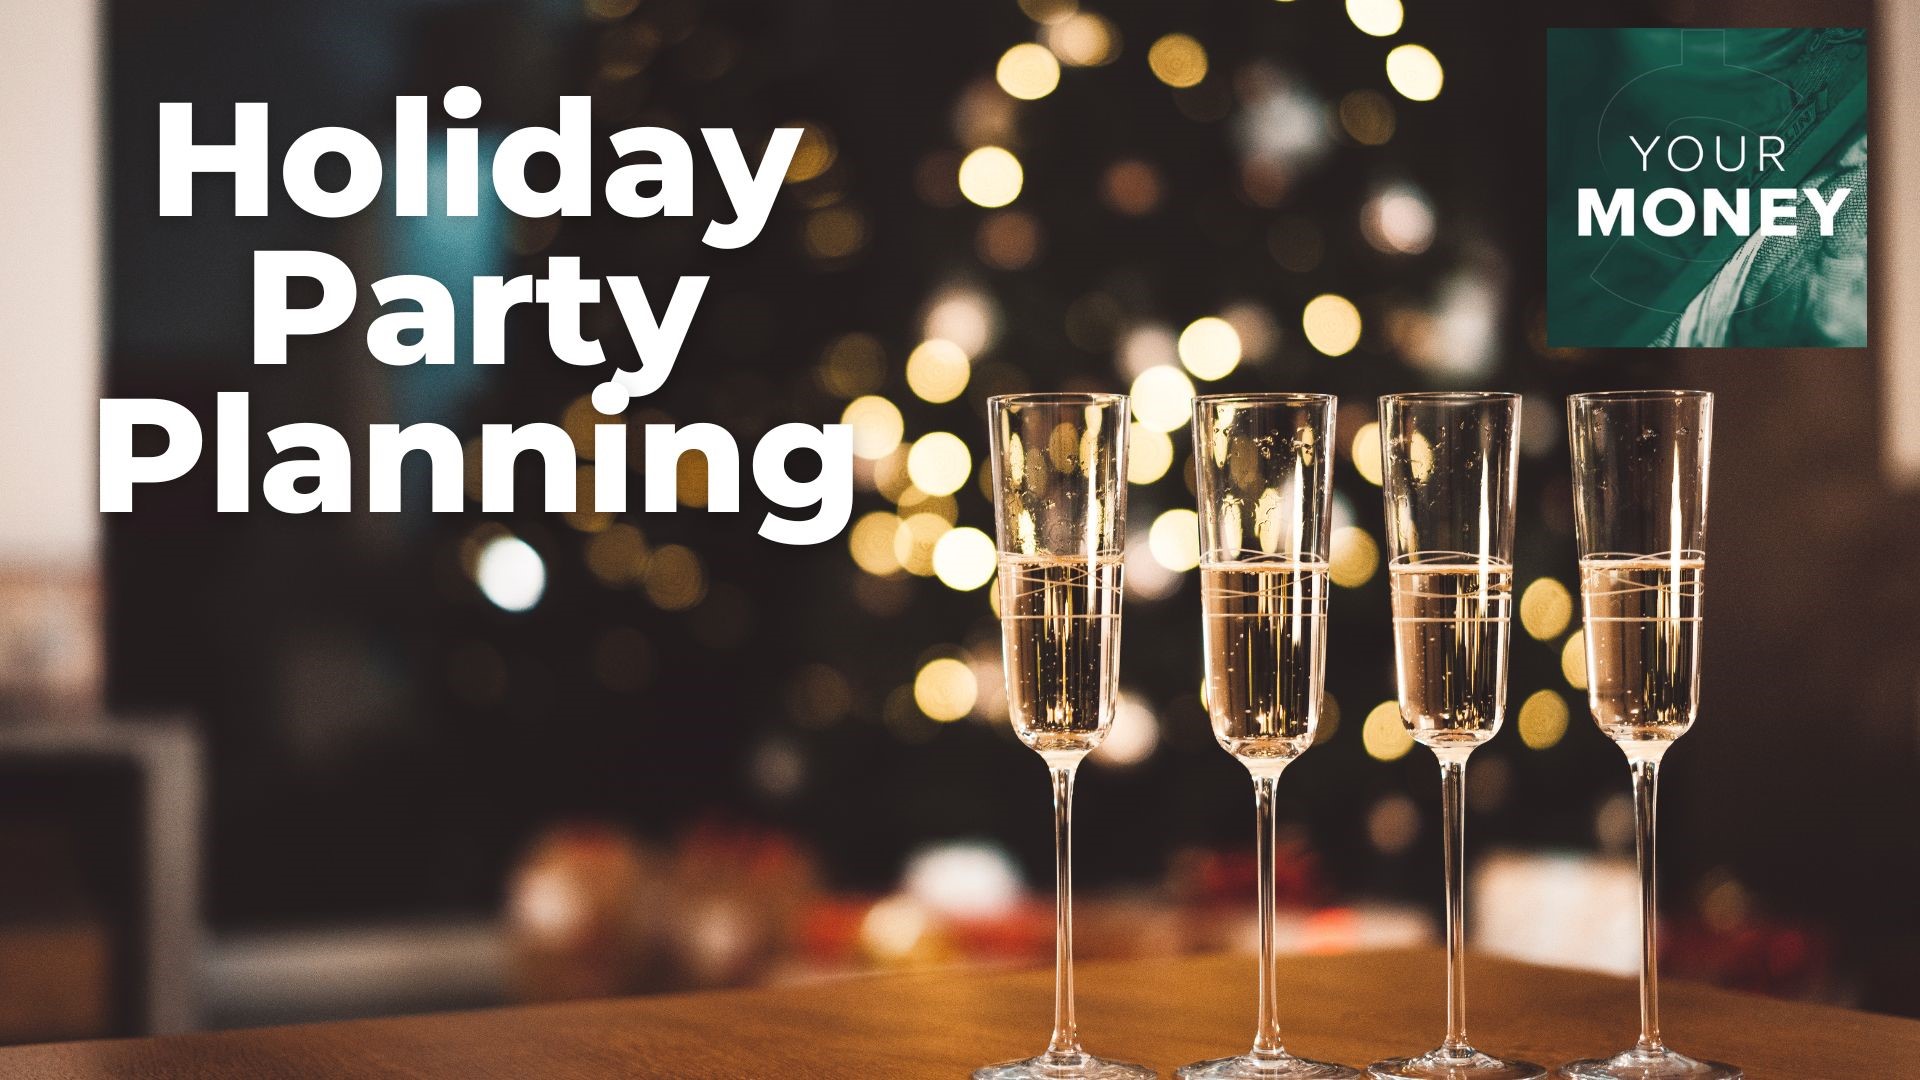 It is time to gather with family and friends. Here are tips for hosting holiday parties, as well as how to be a great guest.